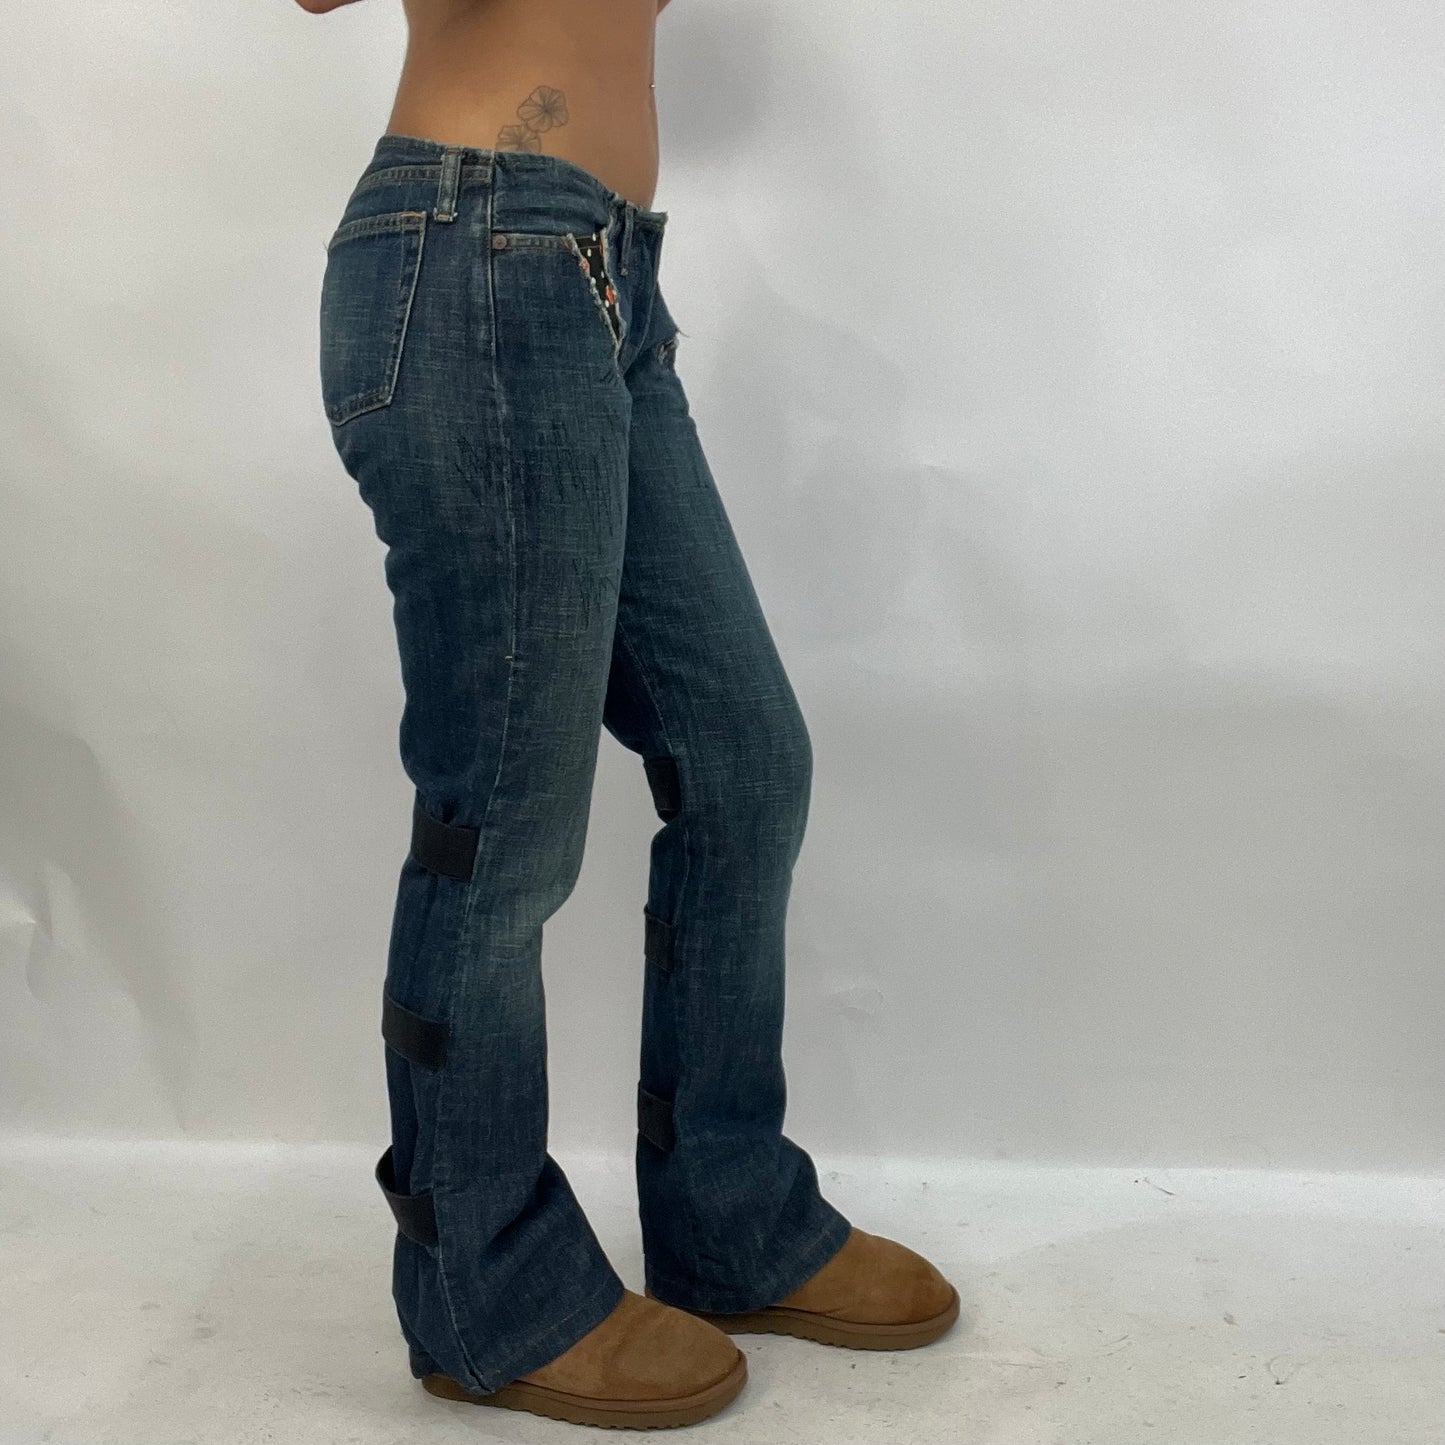 HIPPY CHIC DROP | small dark wash low waisted denim flared jeans with orange flower detail on pockets